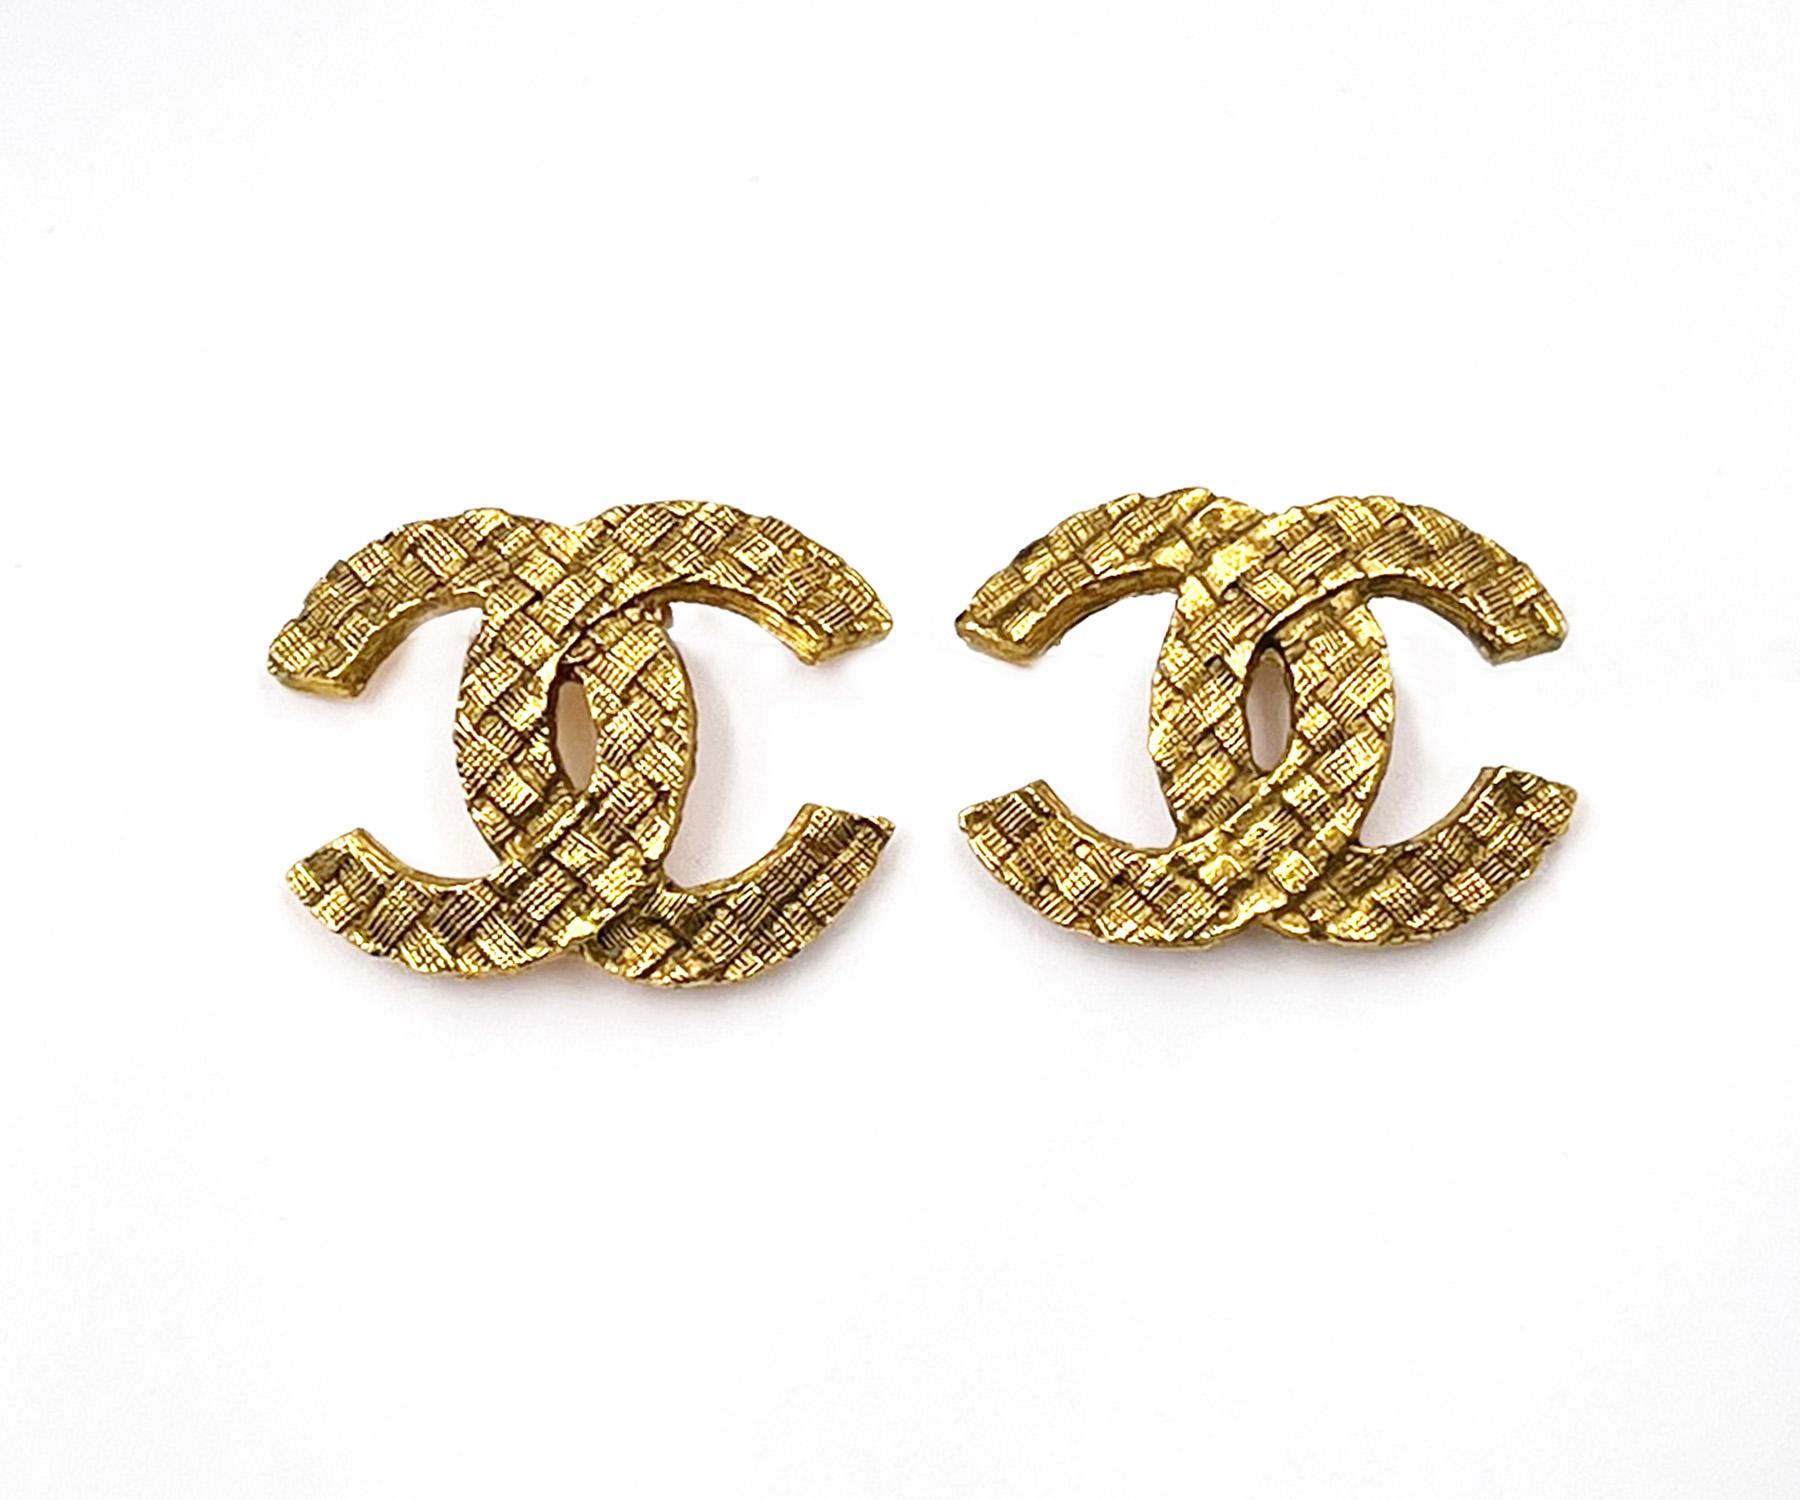 Chanel Vintage Gold Plated CC Basket Weave Small Clip on Earrings

* Marked Chanel and 2913
* Made in France
* Comes with the original box

-It is approximately 1